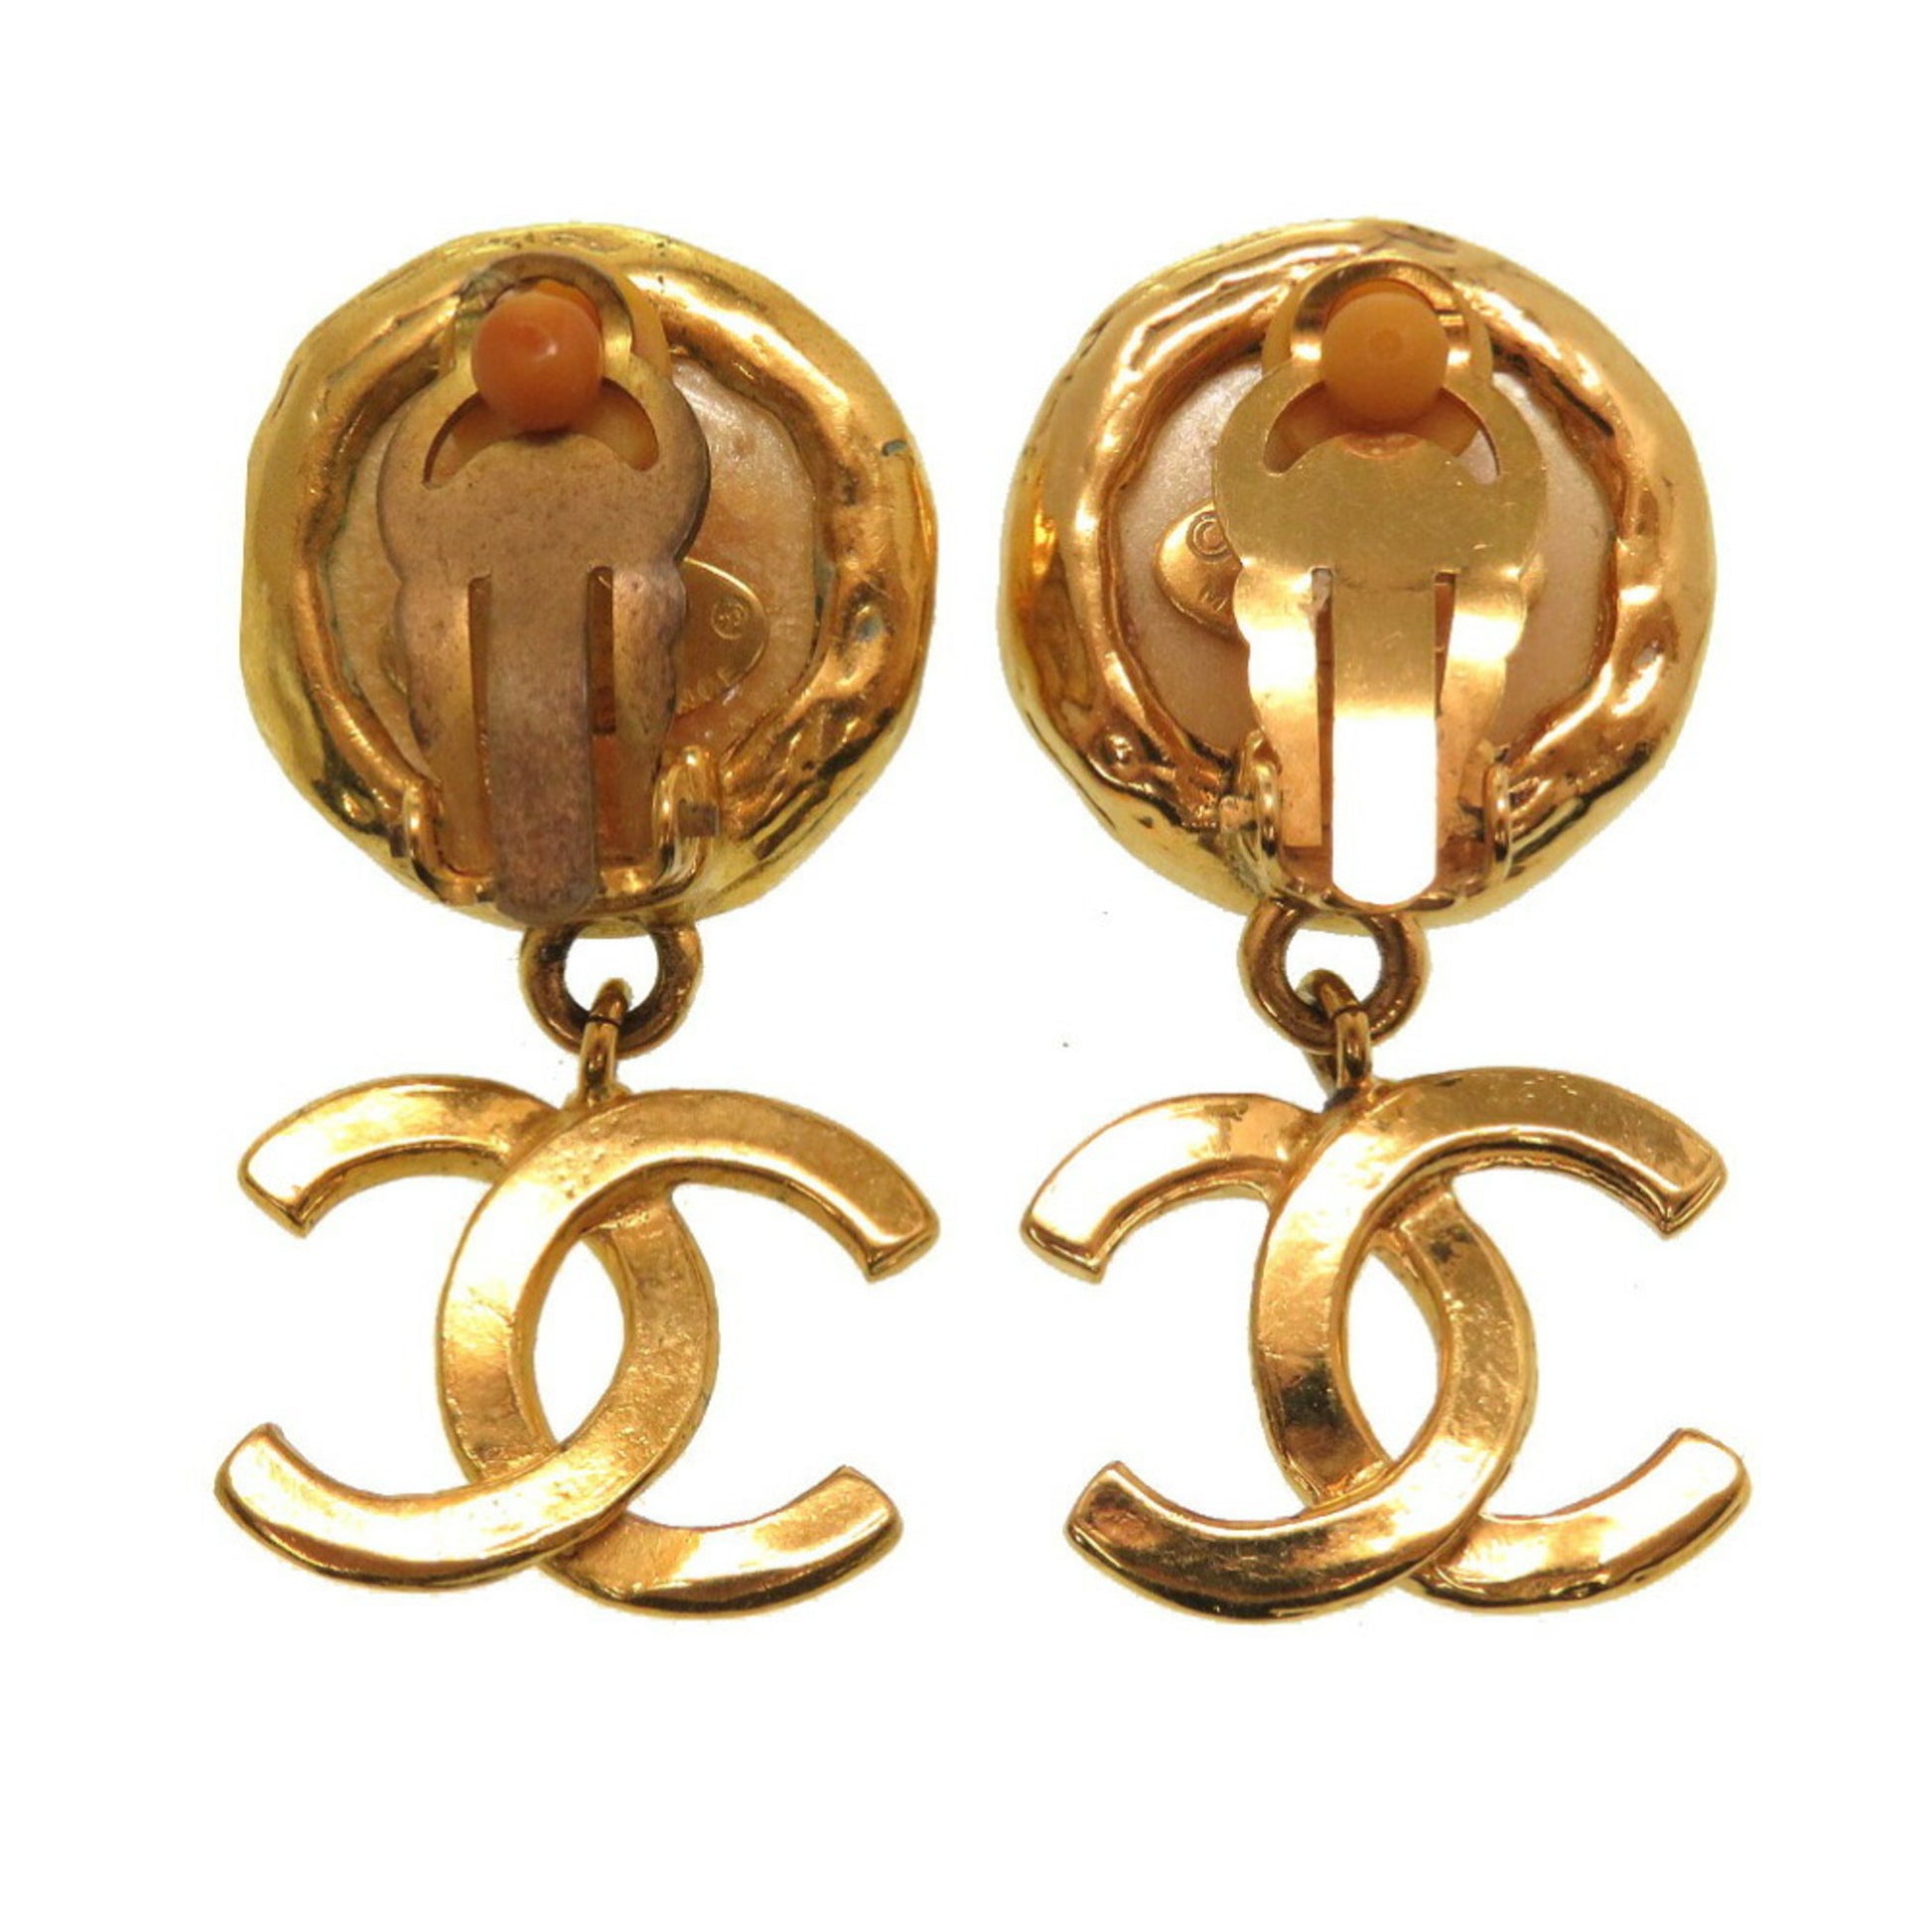 Buy [CHANEL] CHANEL Coco Mark Plastic Orange Ladies Earrings 【second hand】  from Japan - Buy authentic Plus exclusive items from Japan